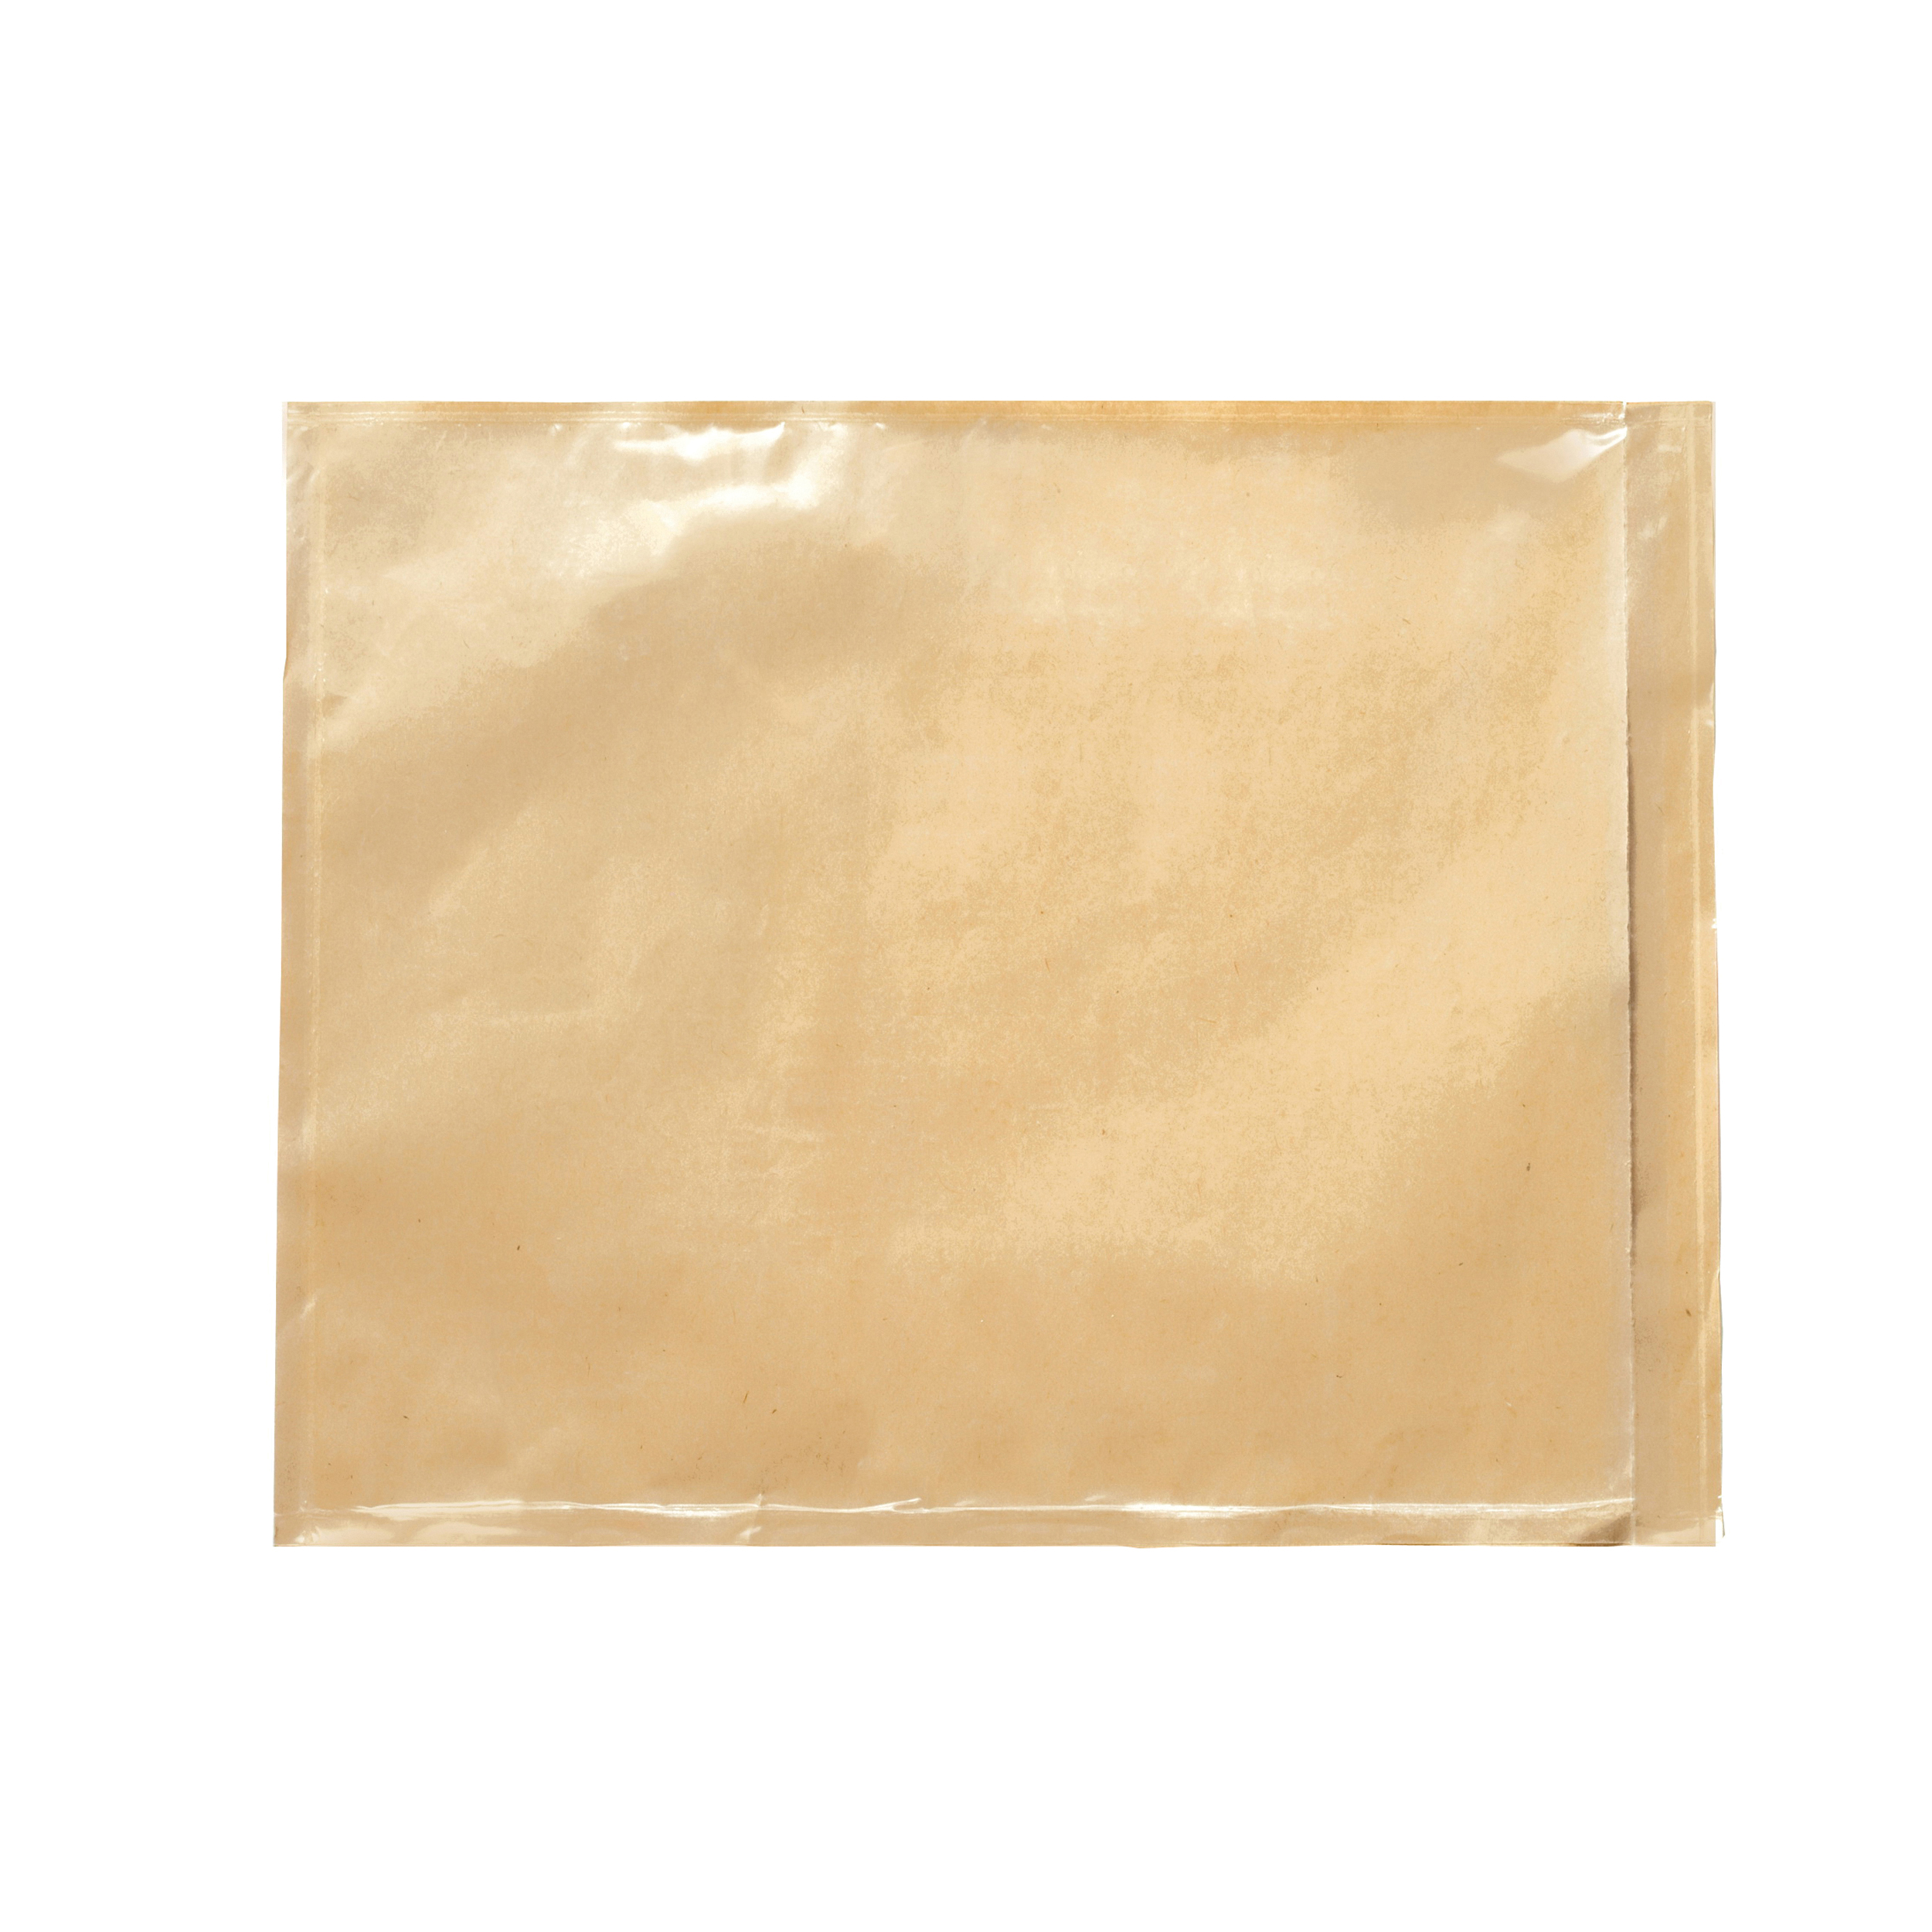 3M™ 051125-74924 PLE-T1 PK500 Top Printed Packing List Envelope, 5-1/2 in L x 4-1/2 in W, Polyethylene Film Backing, Clear